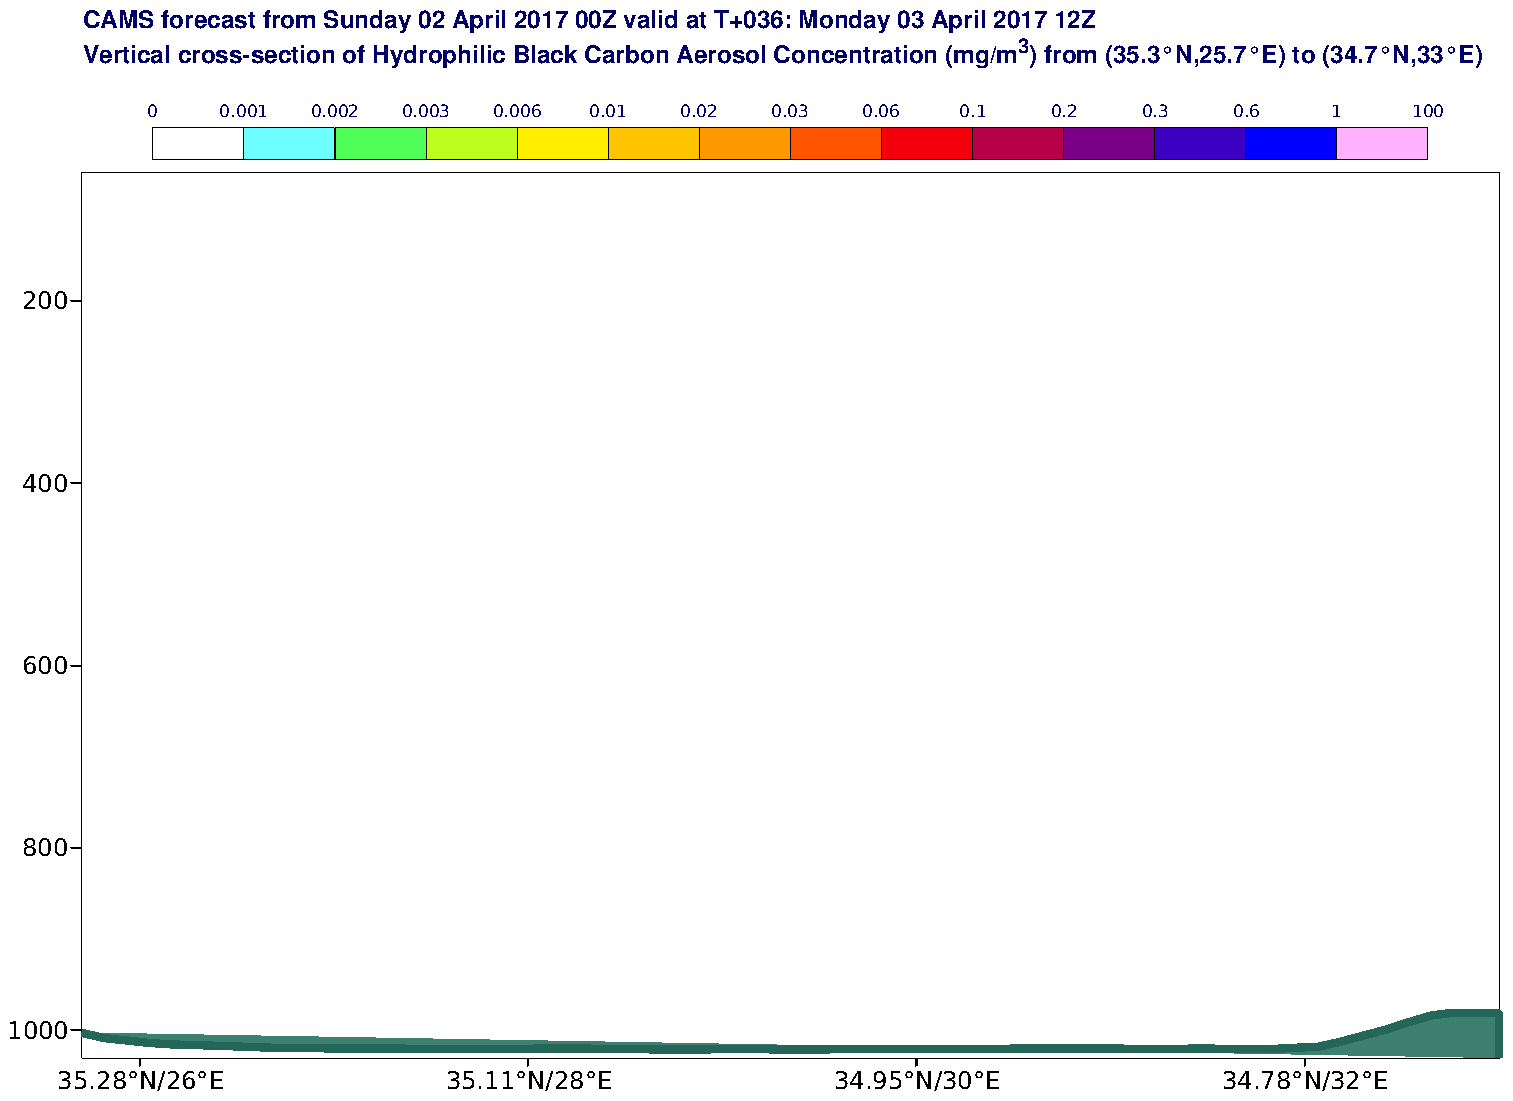 Vertical cross-section of Hydrophilic Black Carbon Aerosol Concentration (mg/m3) valid at T36 - 2017-04-03 12:00